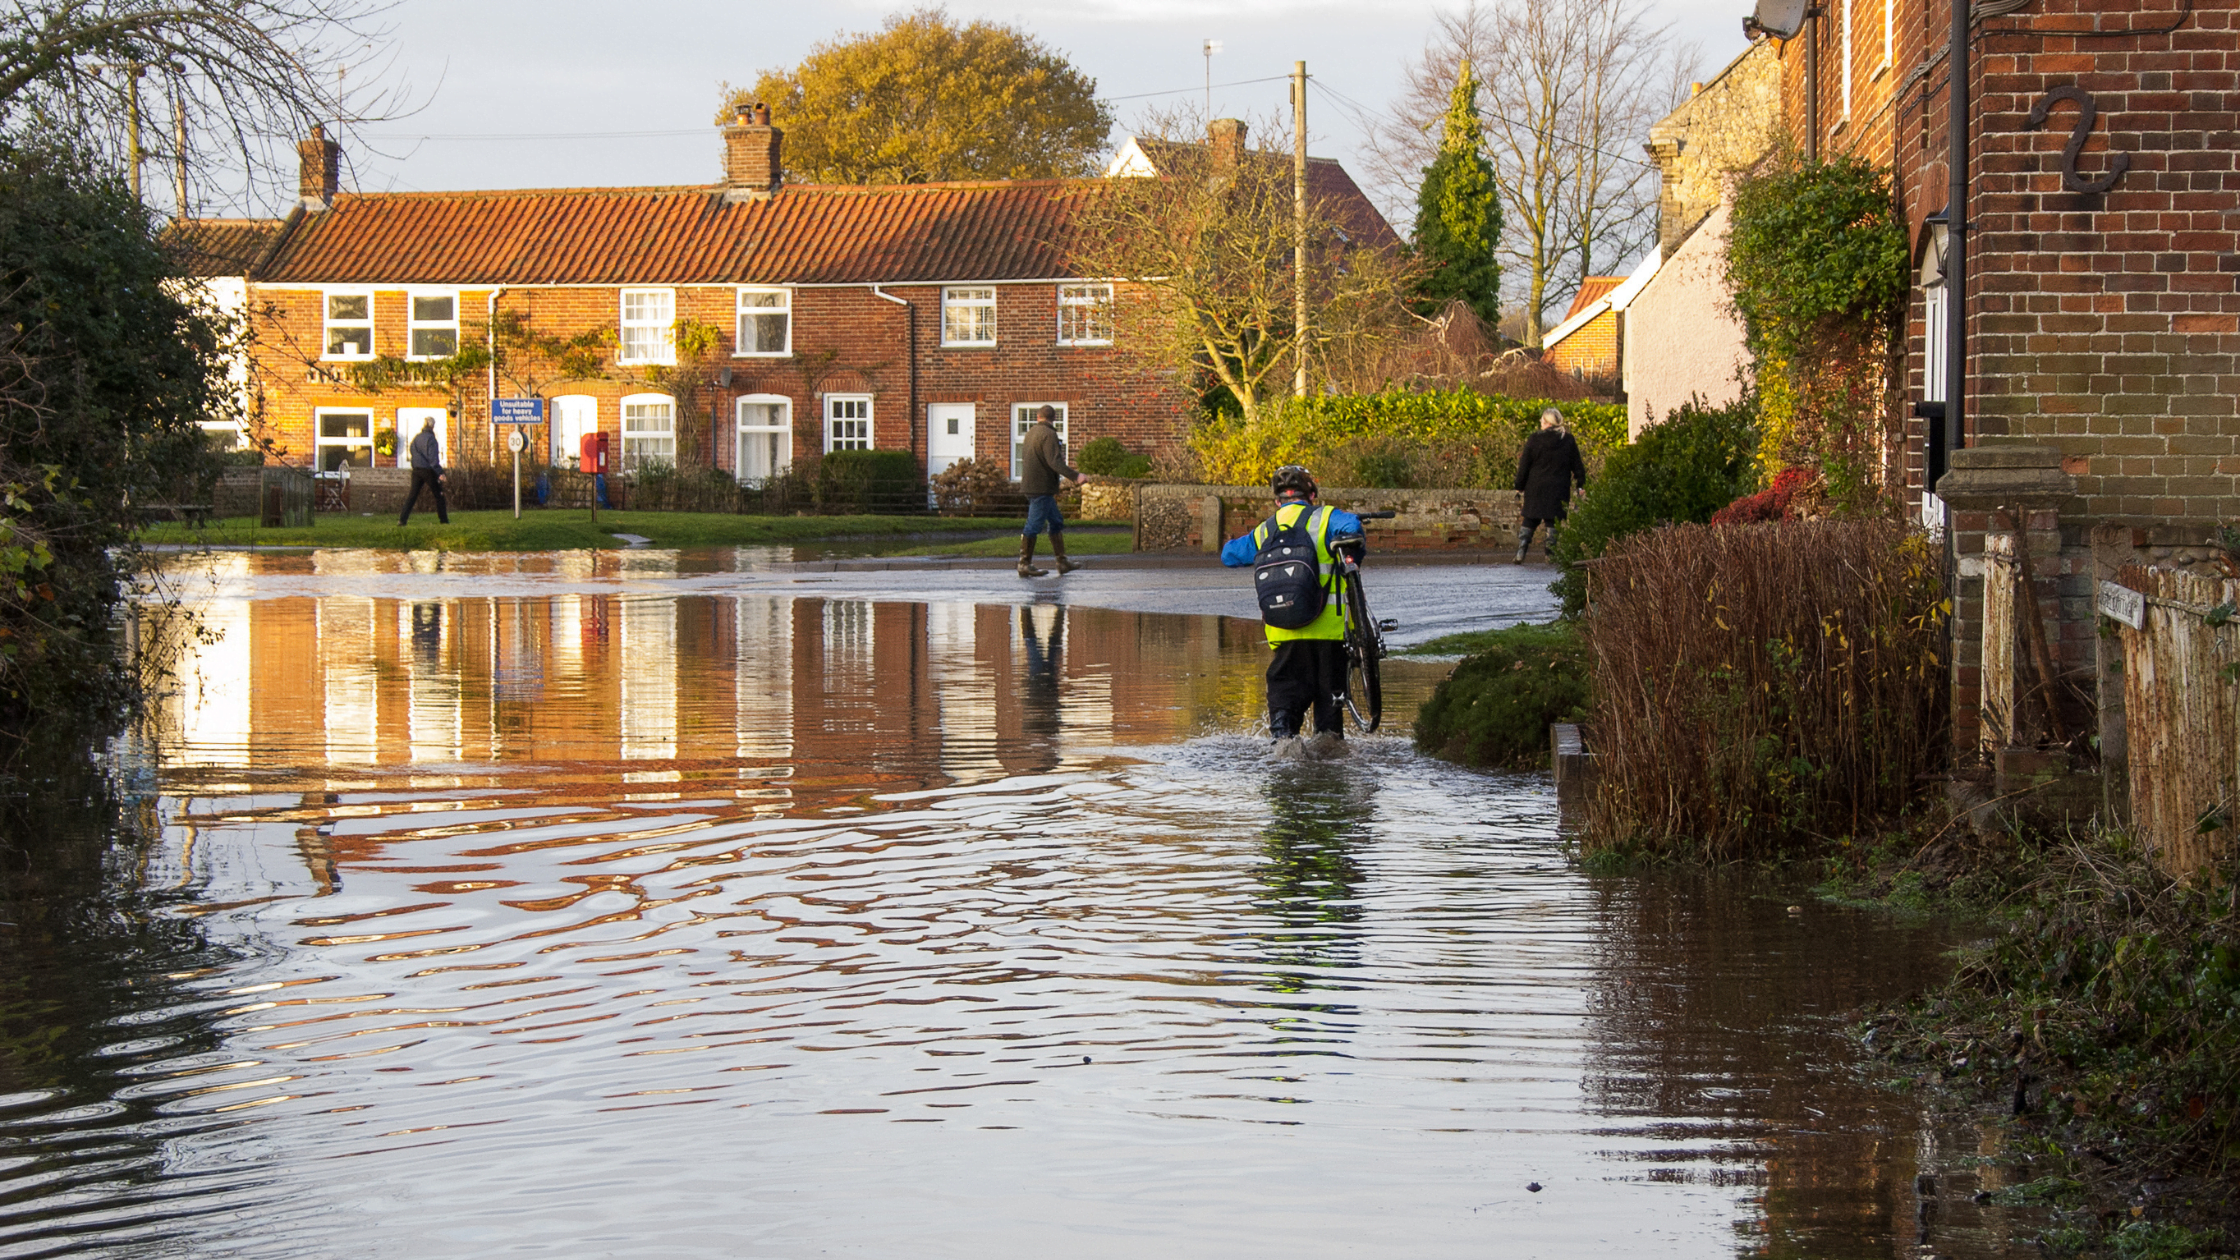 Flood awareness - People and houses in flooded Suffolk residential area